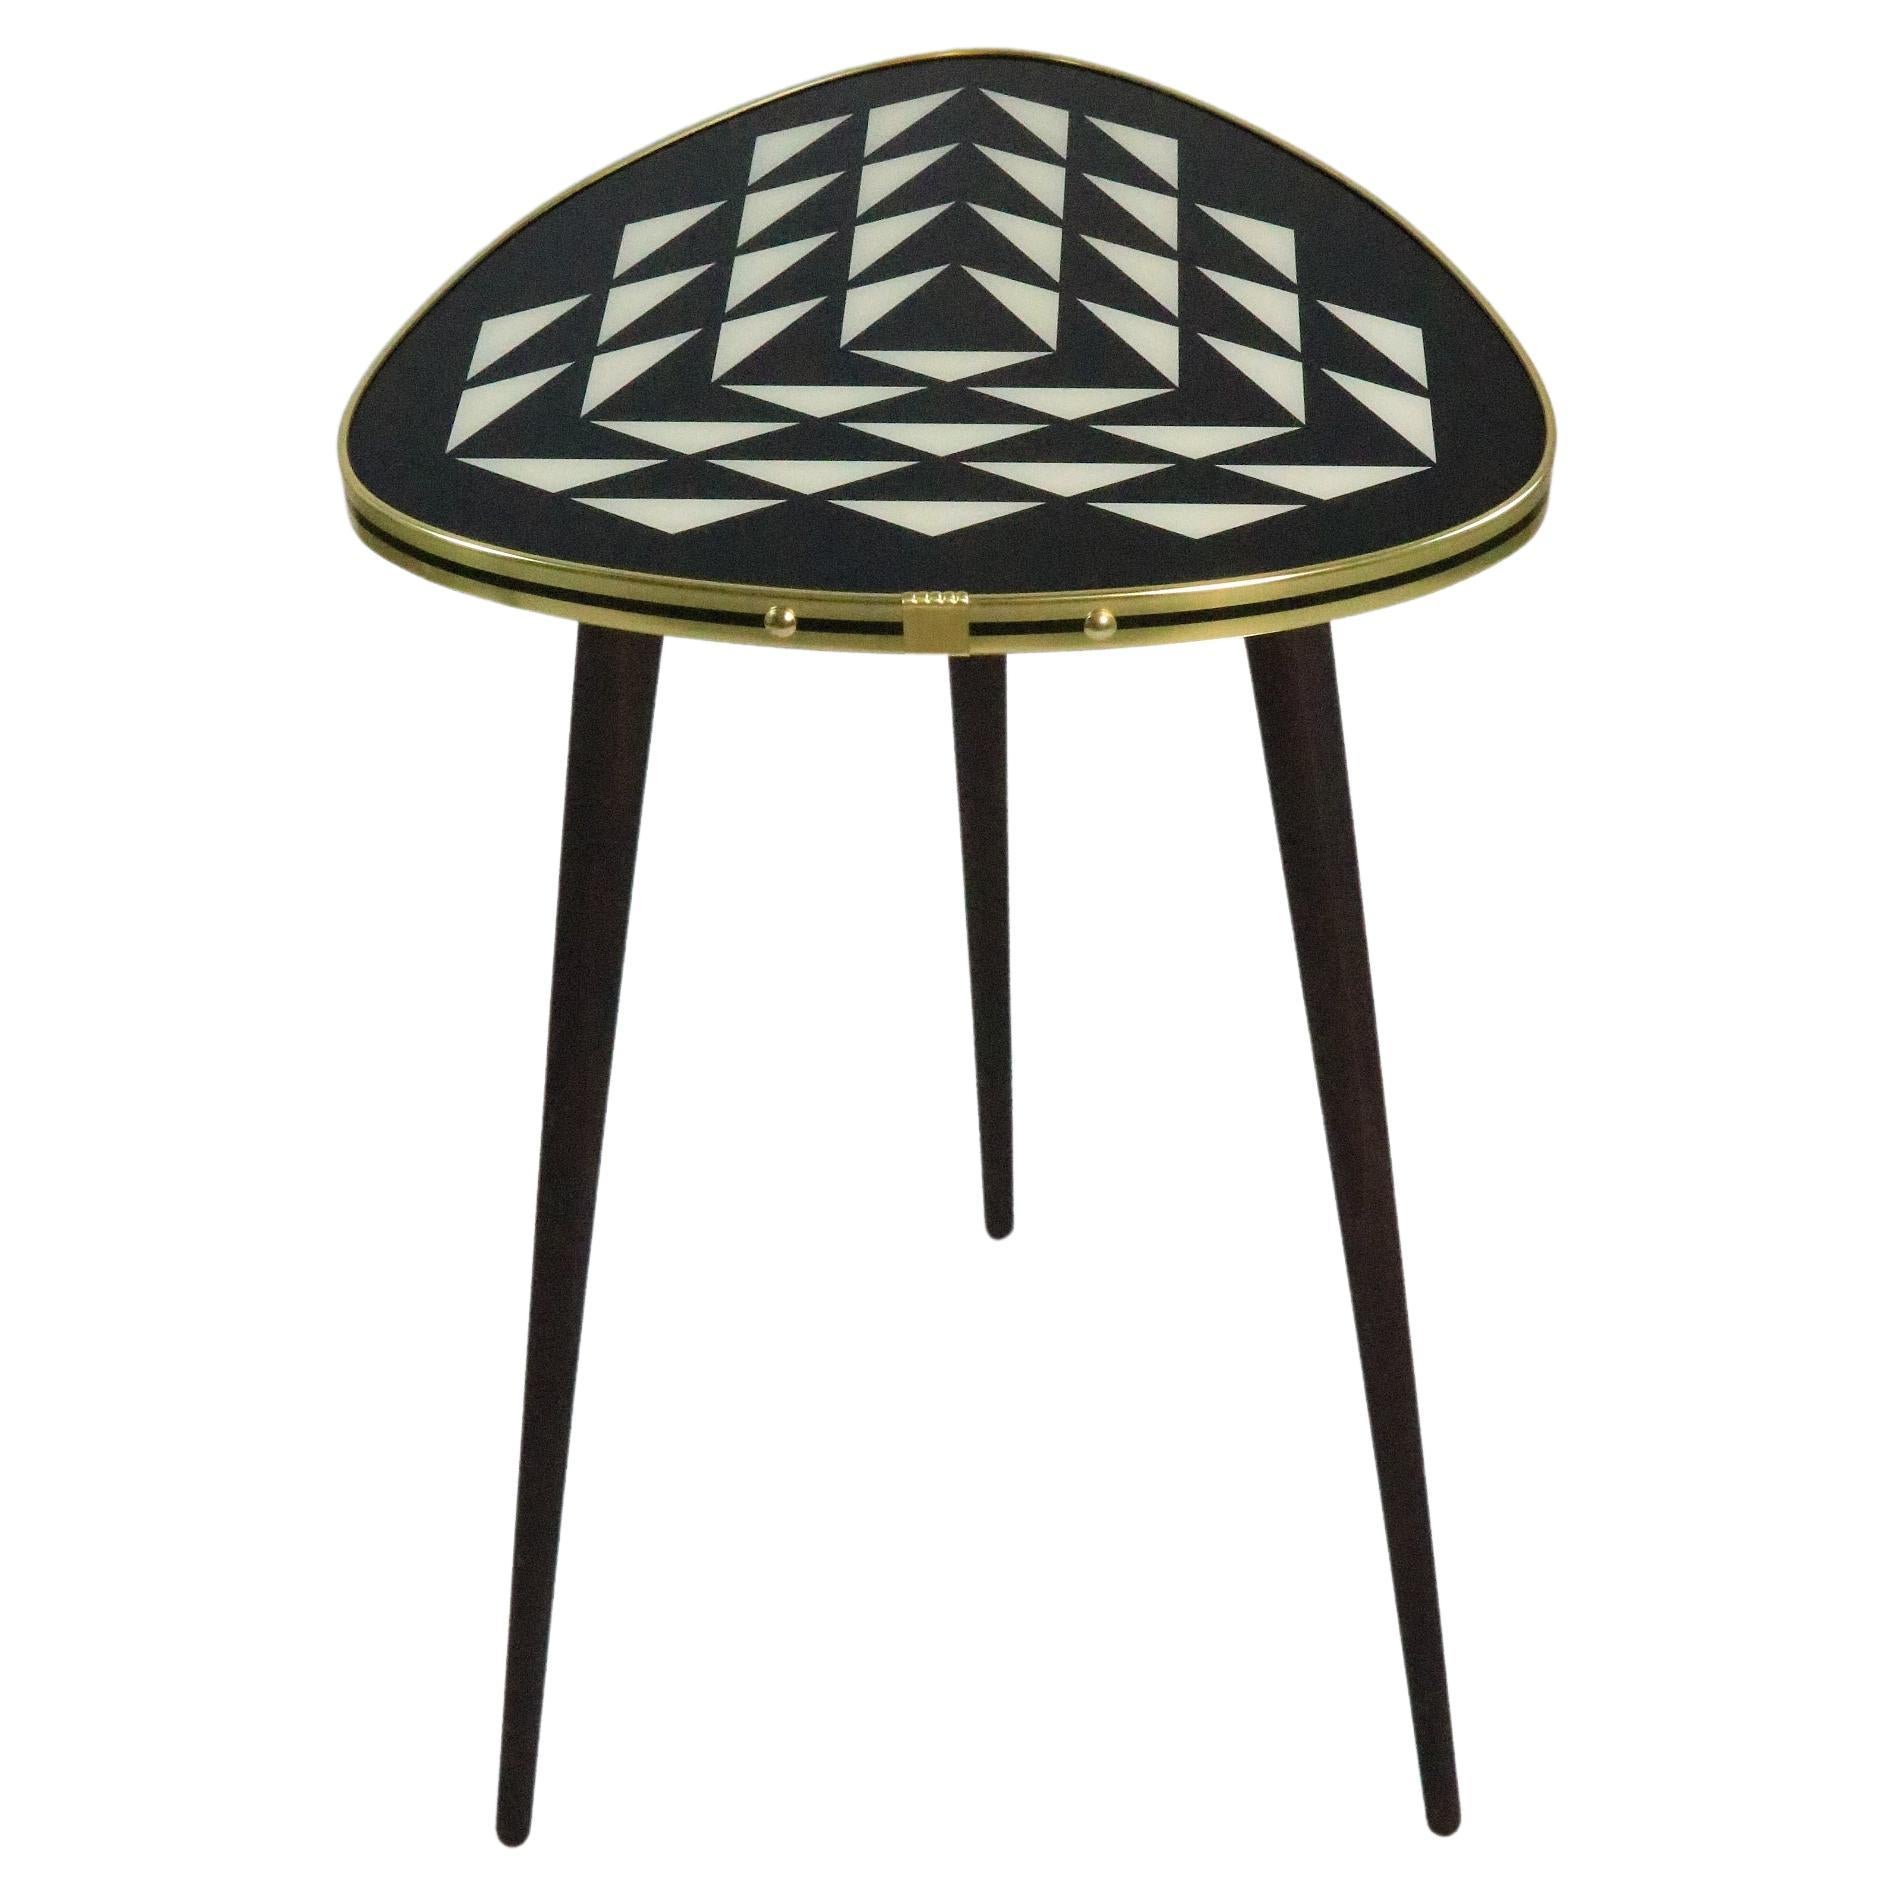 50s Style Side Table, Console, Black / White, 3 Elegant Legs